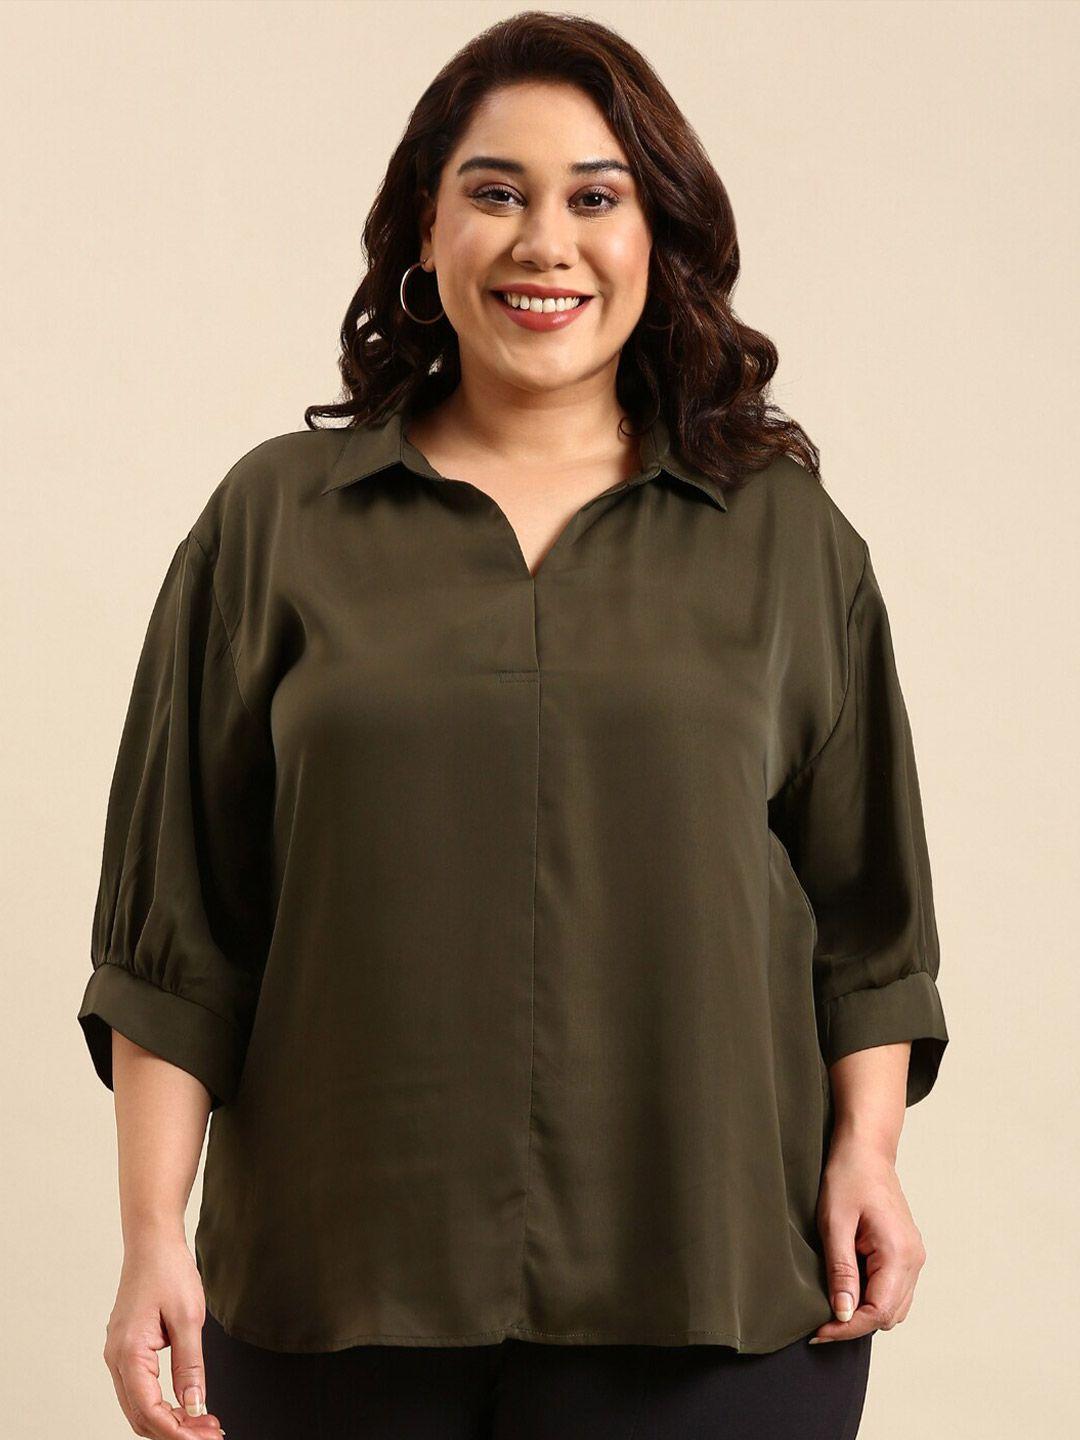 the pink moon plus size shirt collar puff sleeves shirt style top